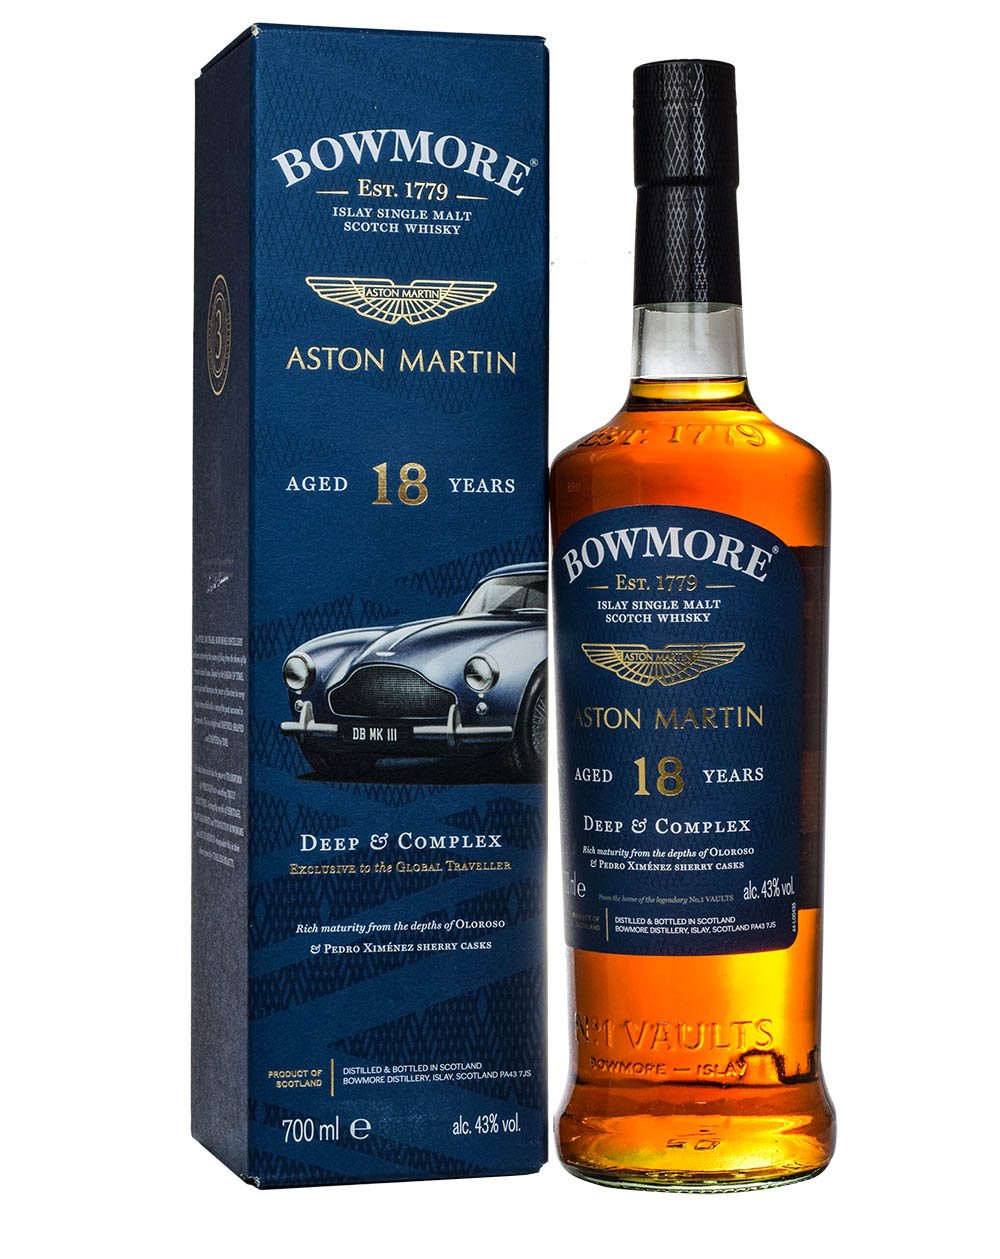 Bowmore 18 Years Old Aston Martin Box Musthave Malts MHM